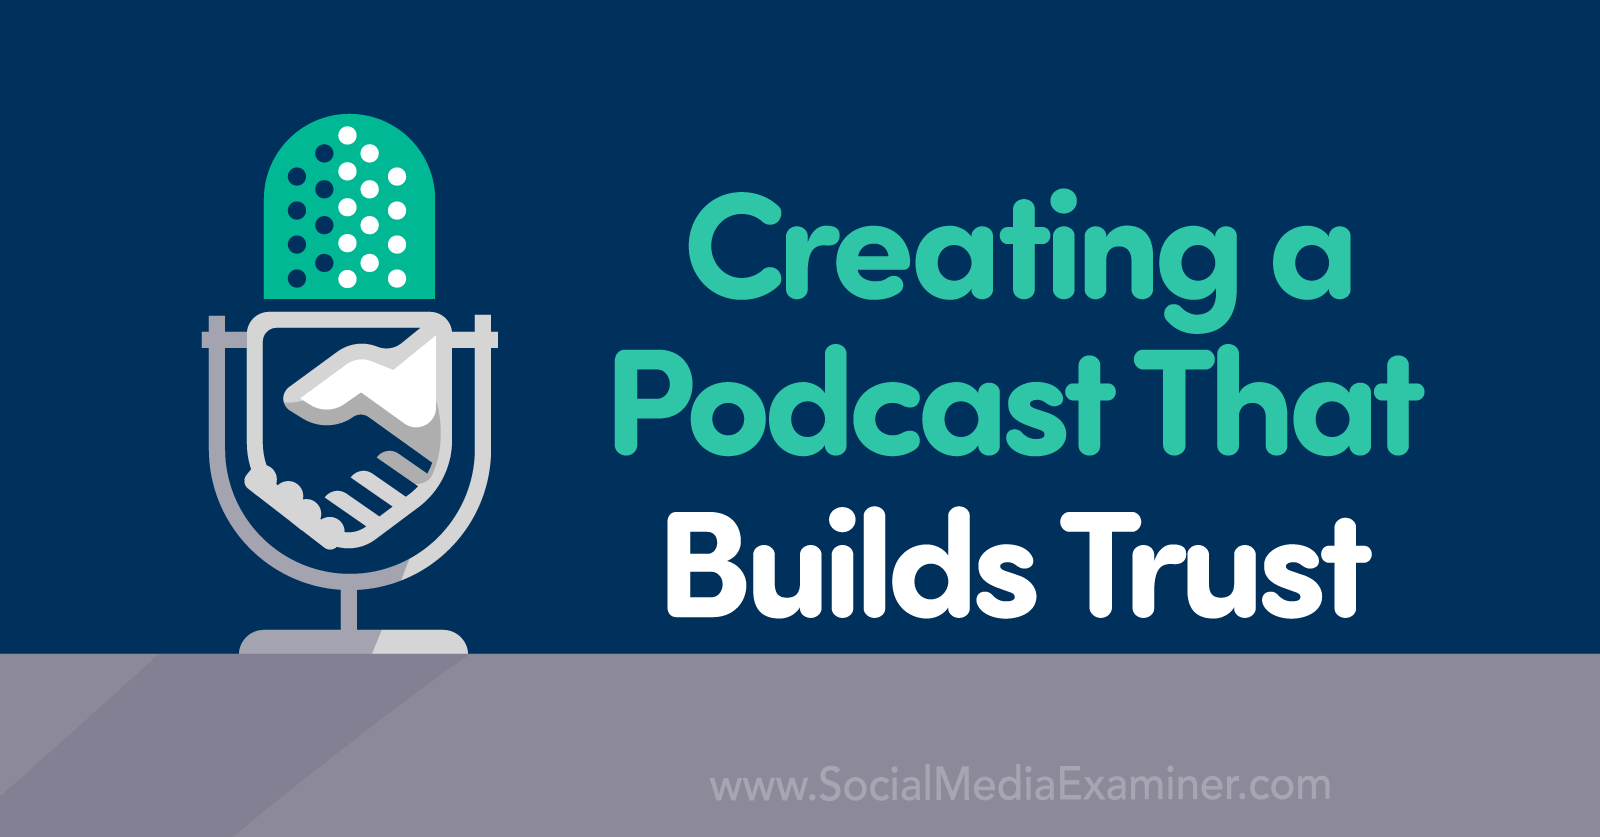 Creating a Podcast That Builds Trust featuring insights from Paul Colligan on the Social Media Marketing Podcast.